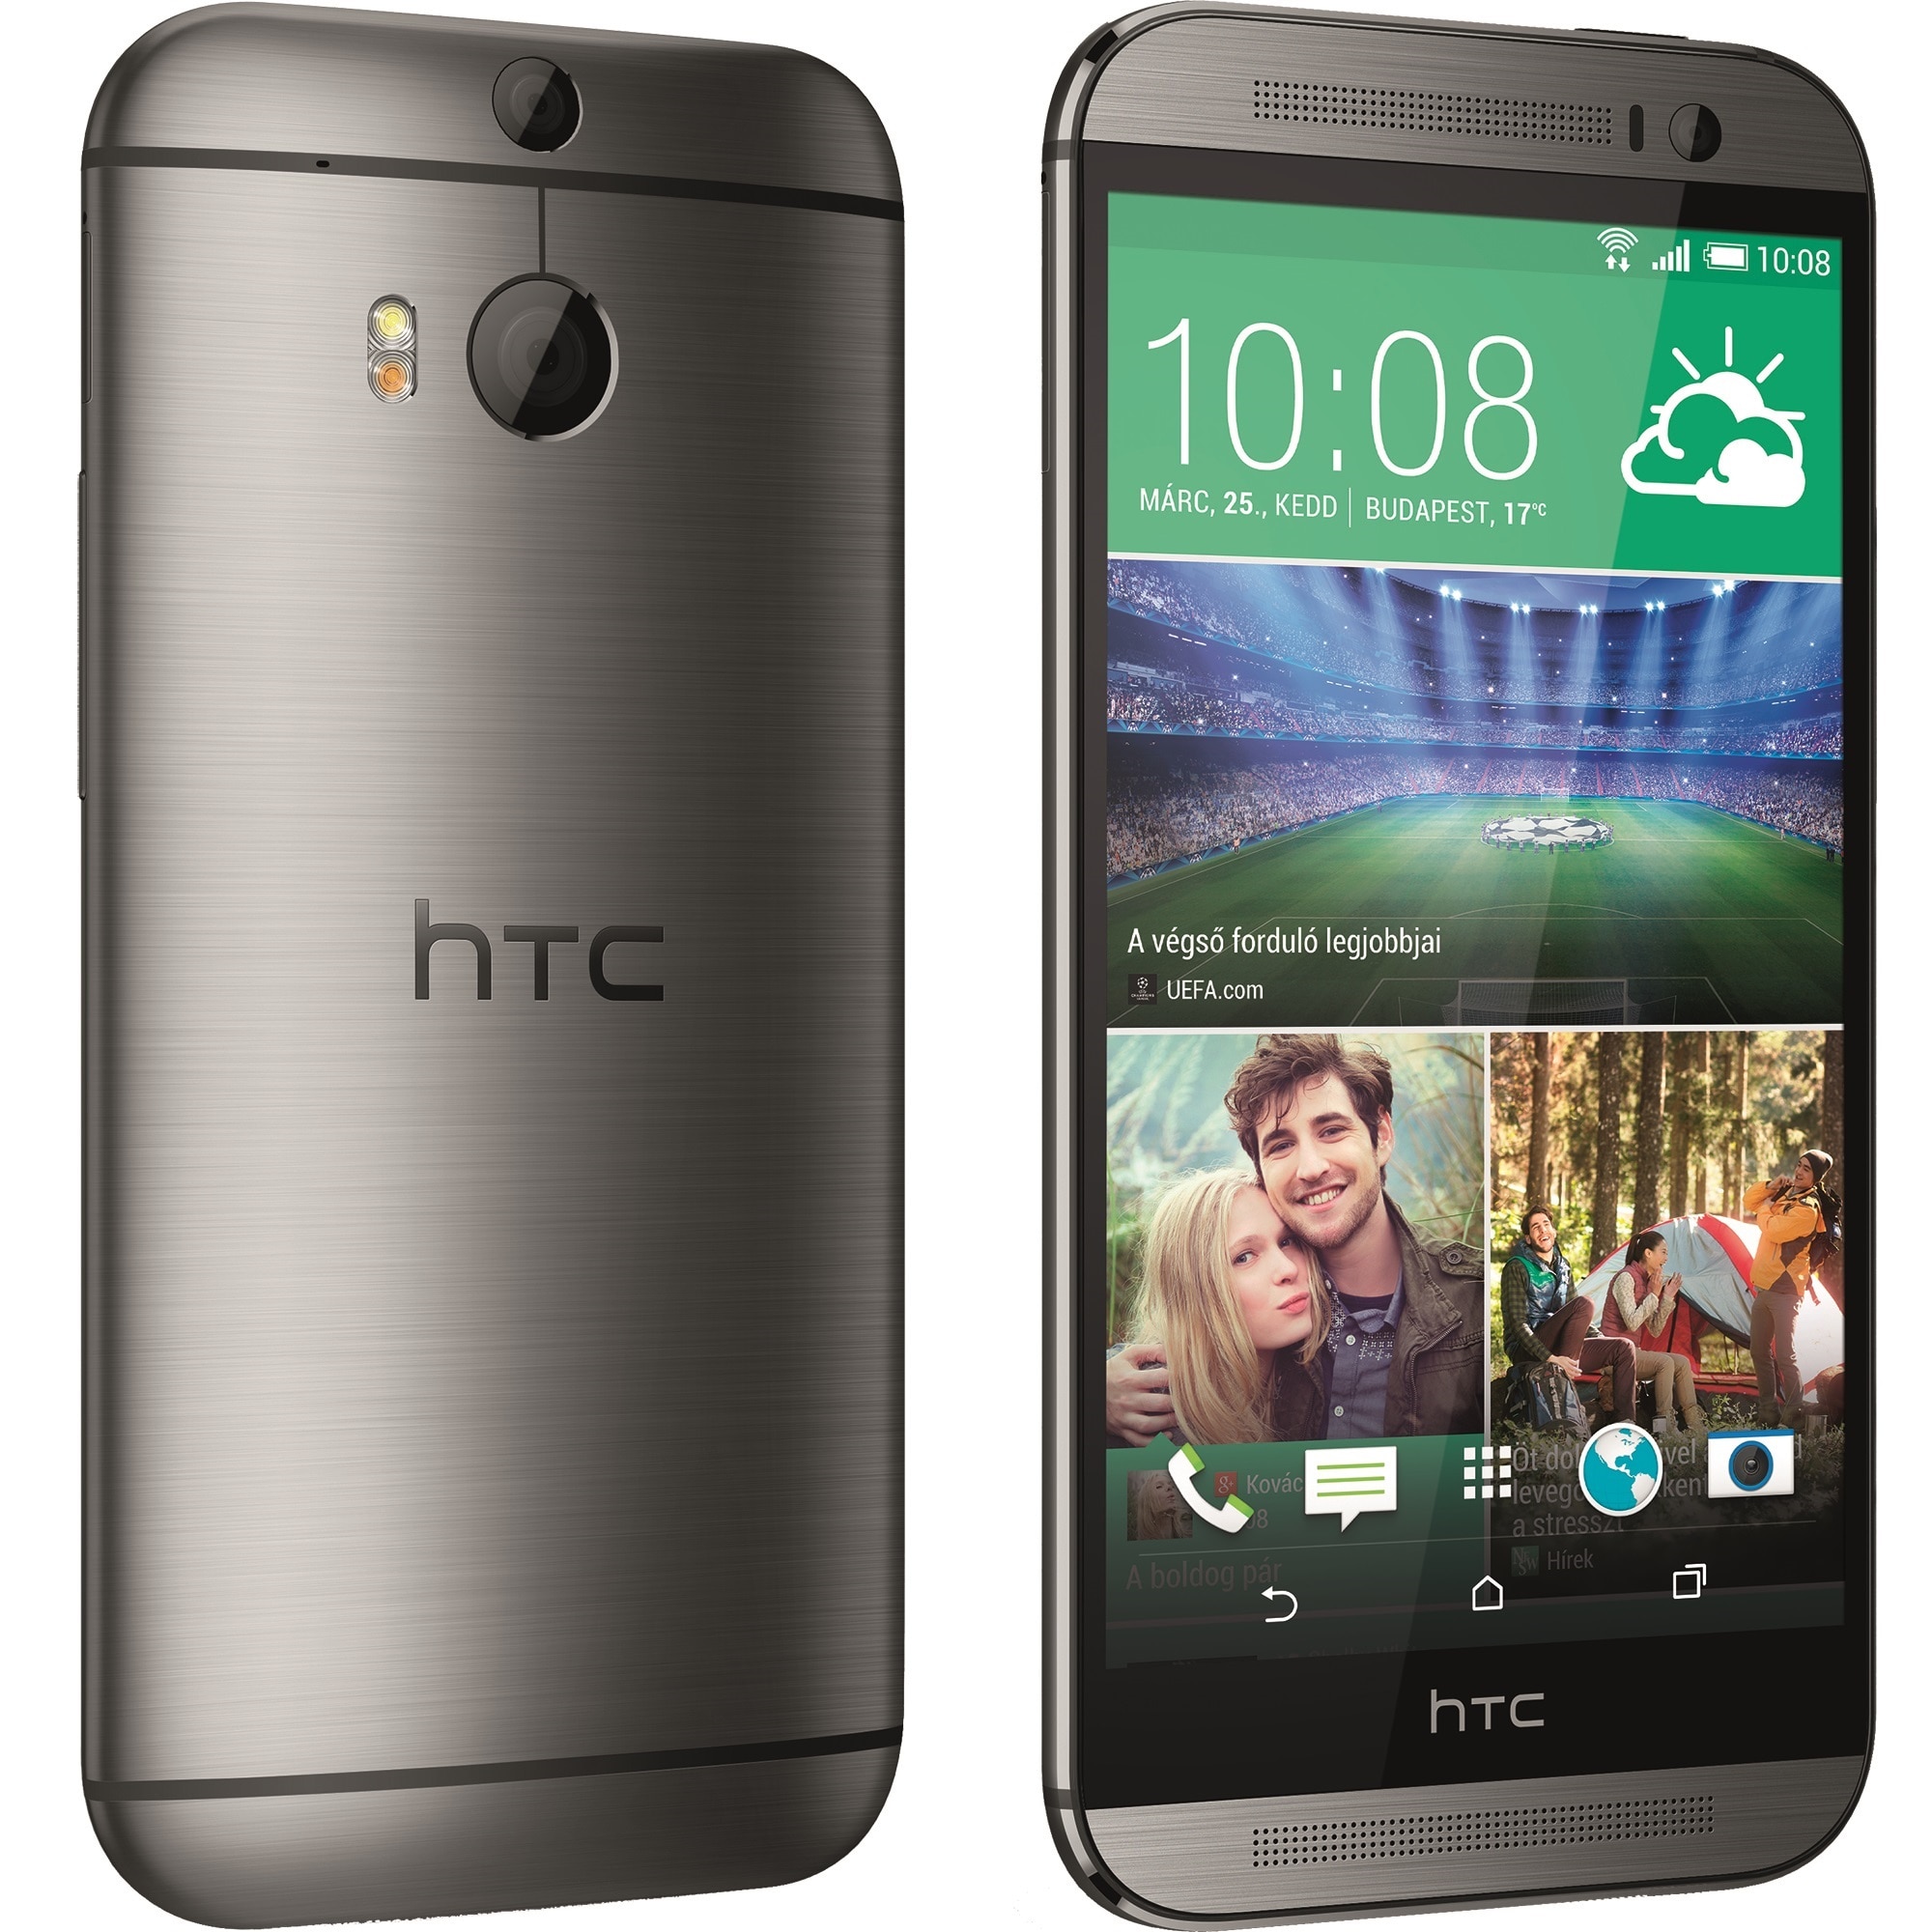 exception Lean Grave Telefon mobil HTC One M8S, 16 GB, 4G, Grey - eMAG.ro